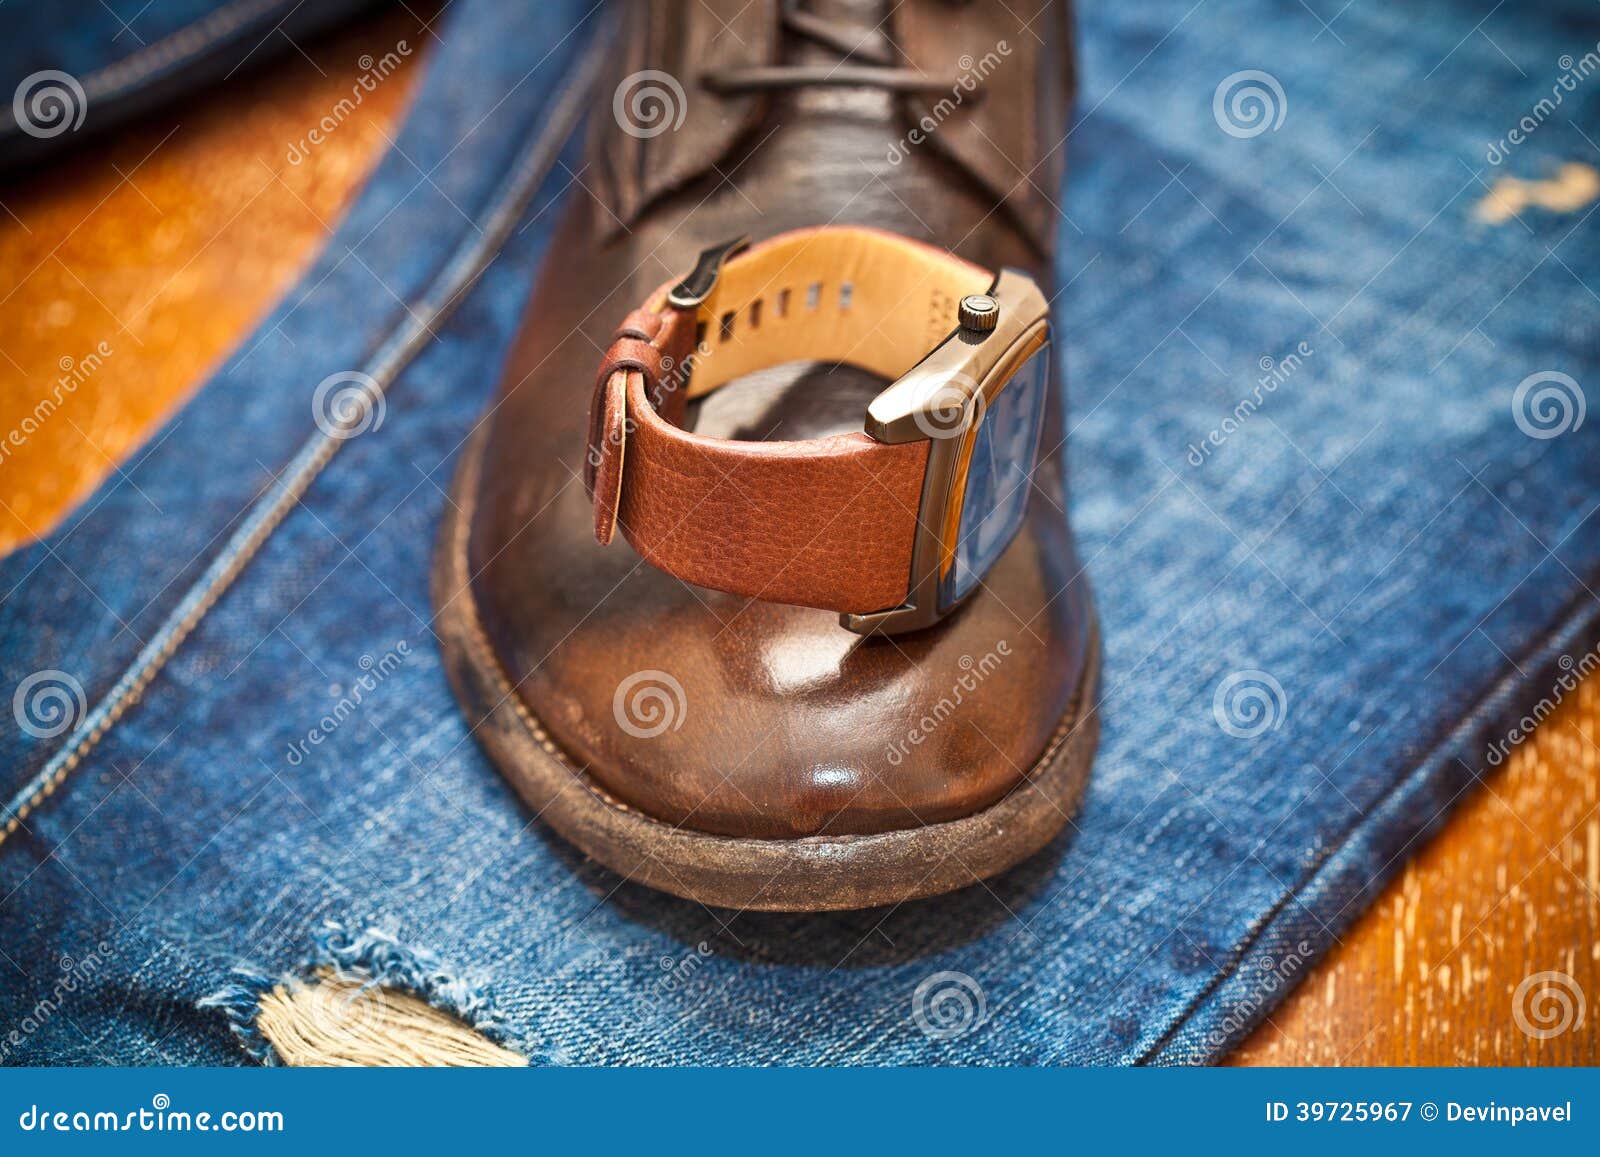 Men S Watches, Leather Shoes, Jeans Stock Image - Image of chrome ...